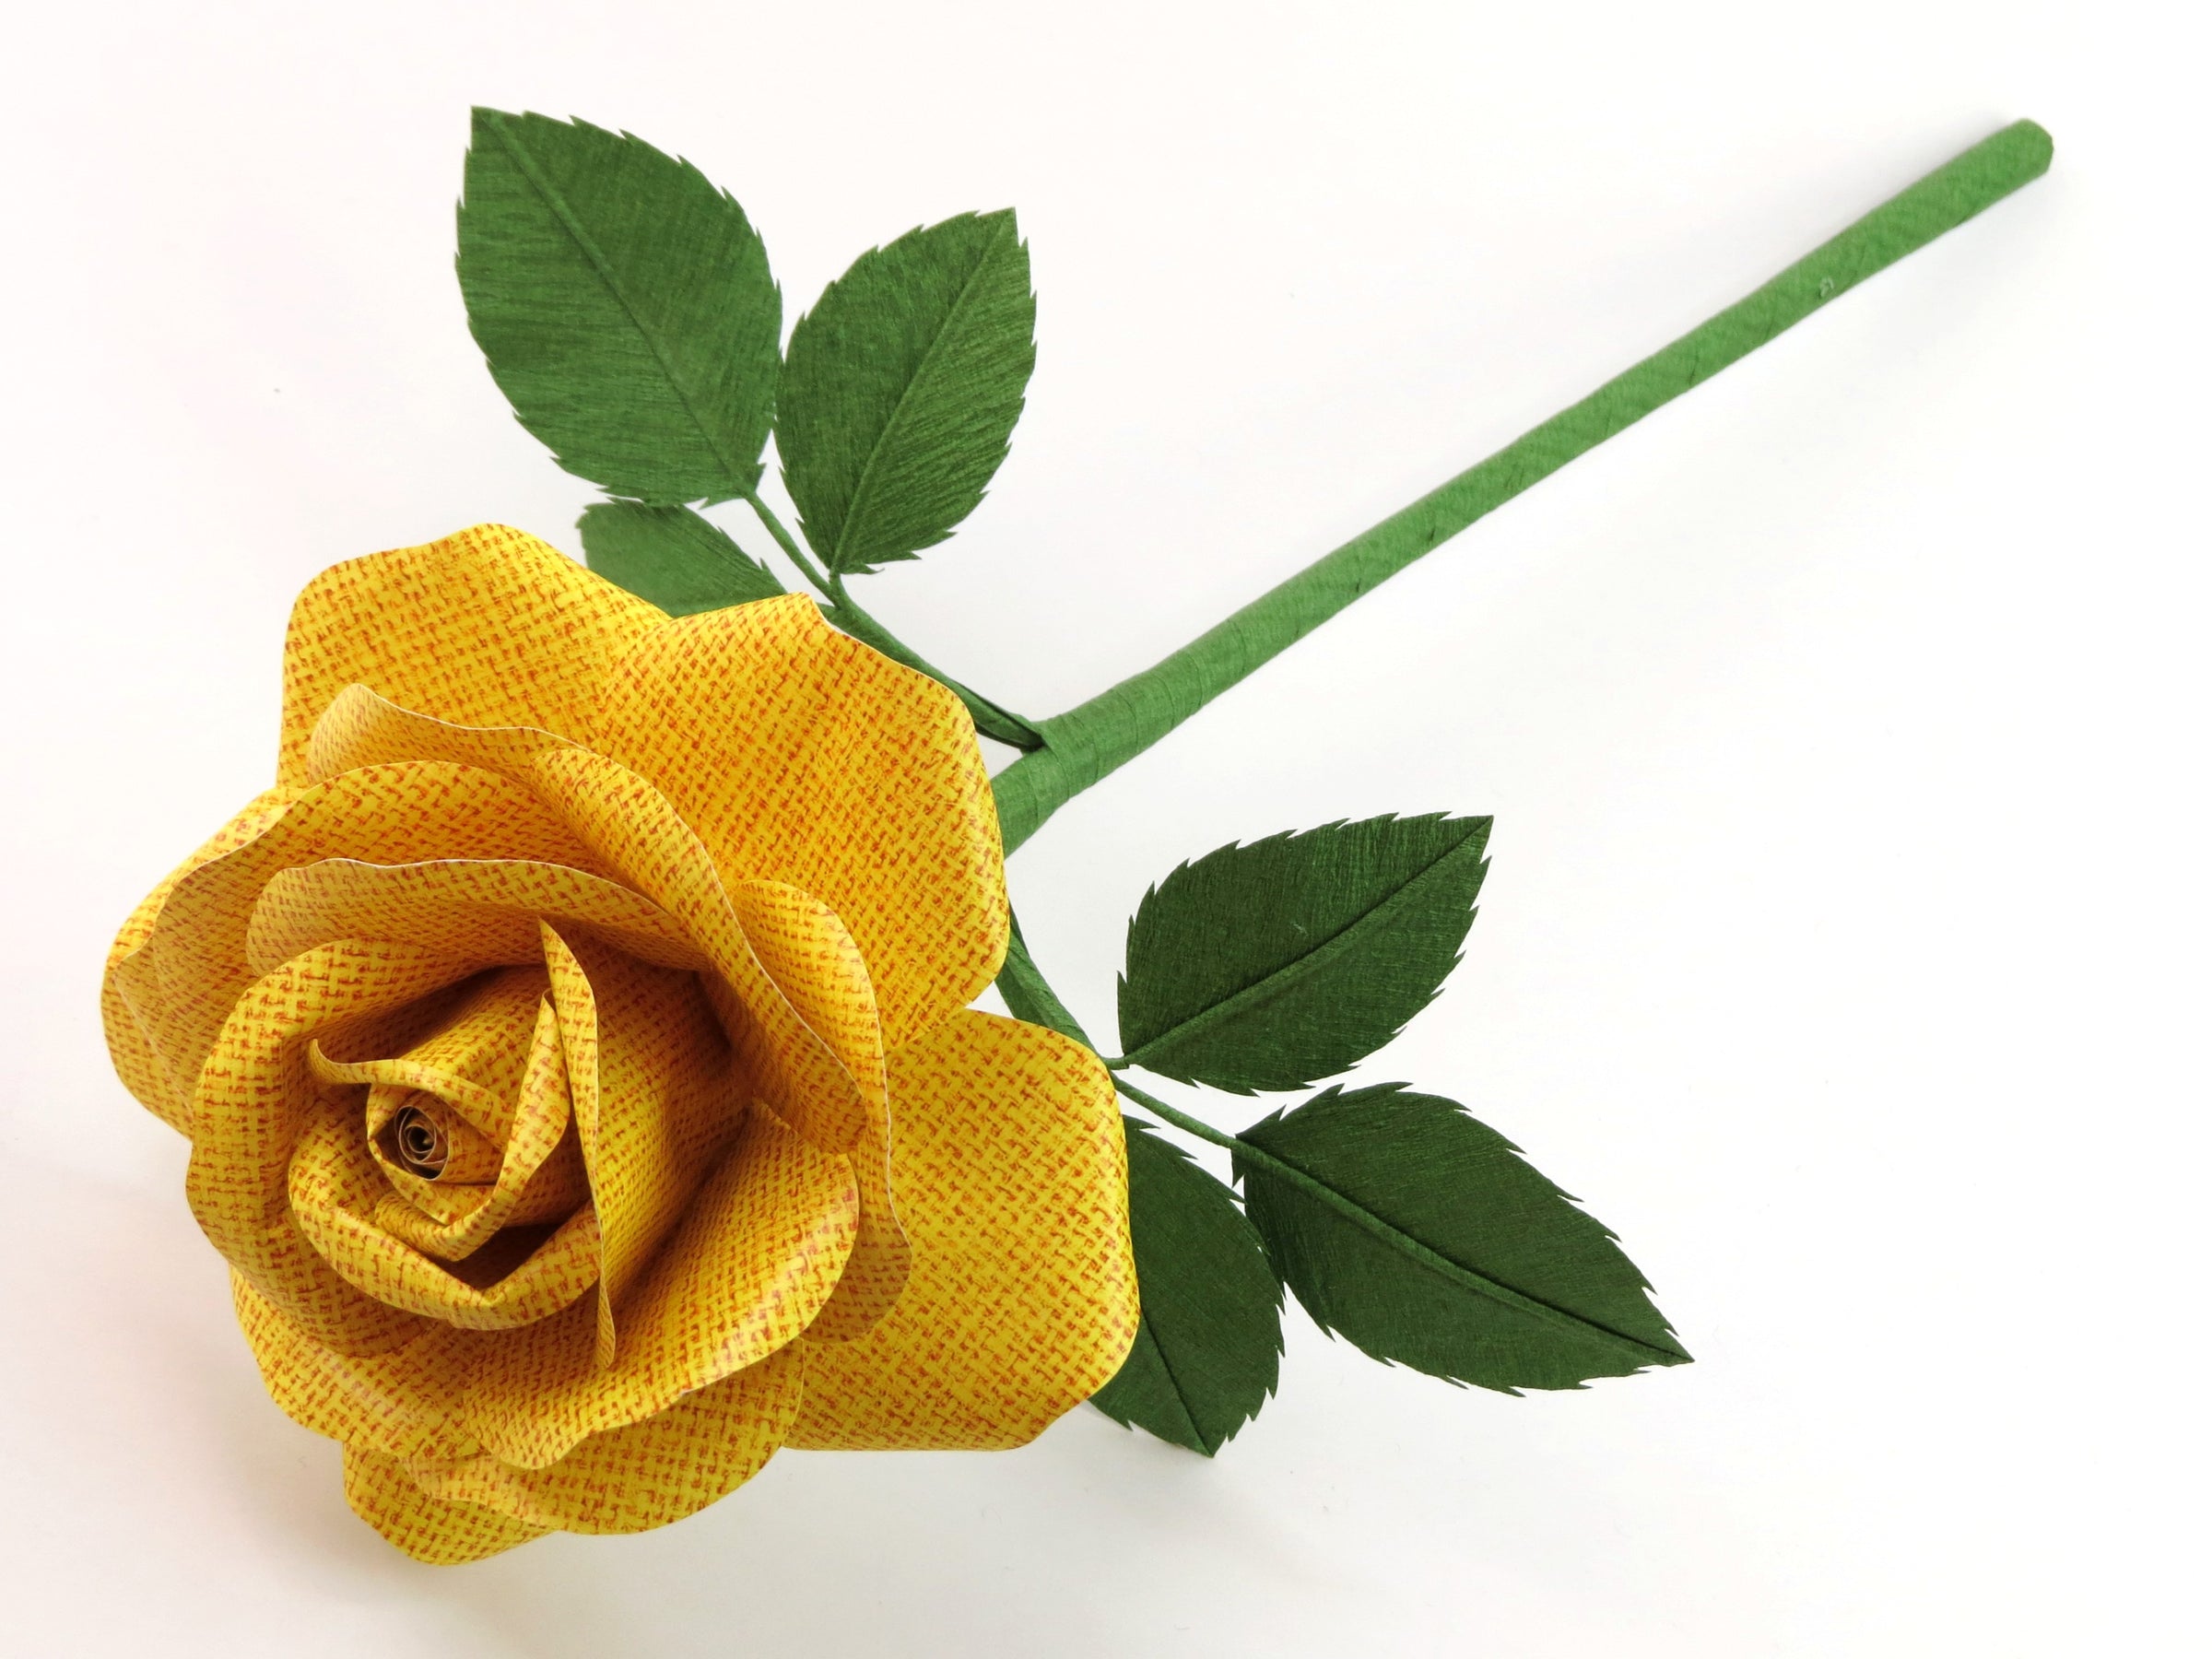 Bright yellow linen grain paper rose lying diagonally across a white background with six green leaves